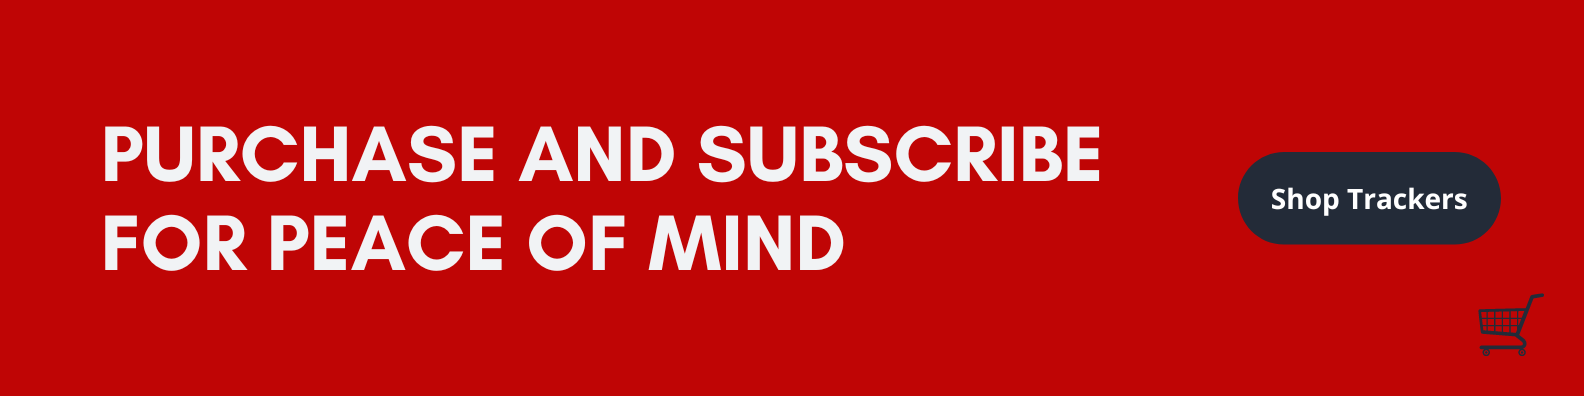 Purchase and Subscribe for Peace of Mind